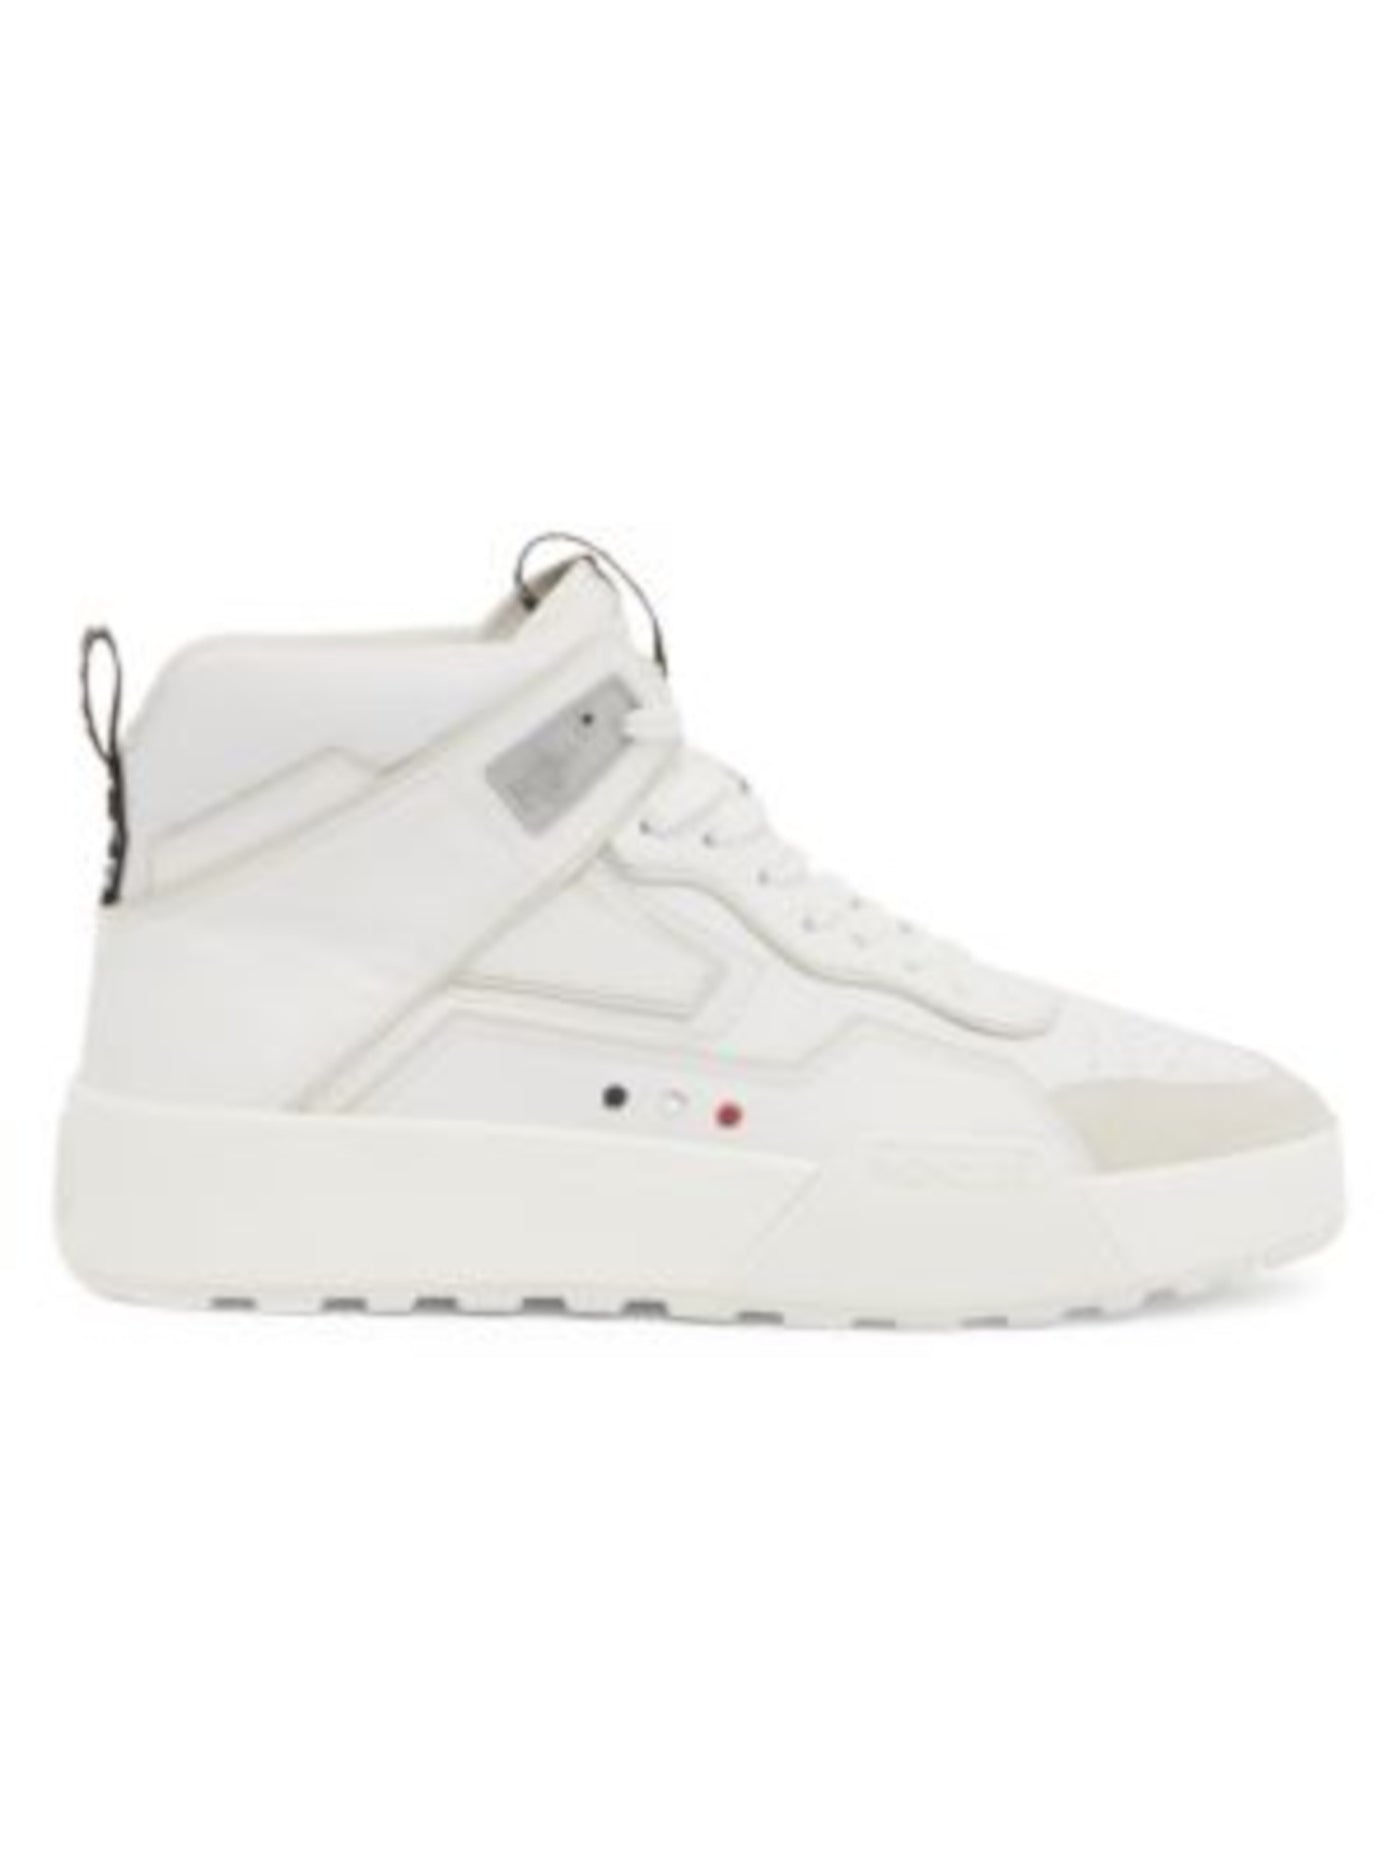 MONCLER Womens White Perforated Logo Promyx Round Toe Wedge Lace-Up Leather Athletic Sneakers 38.5